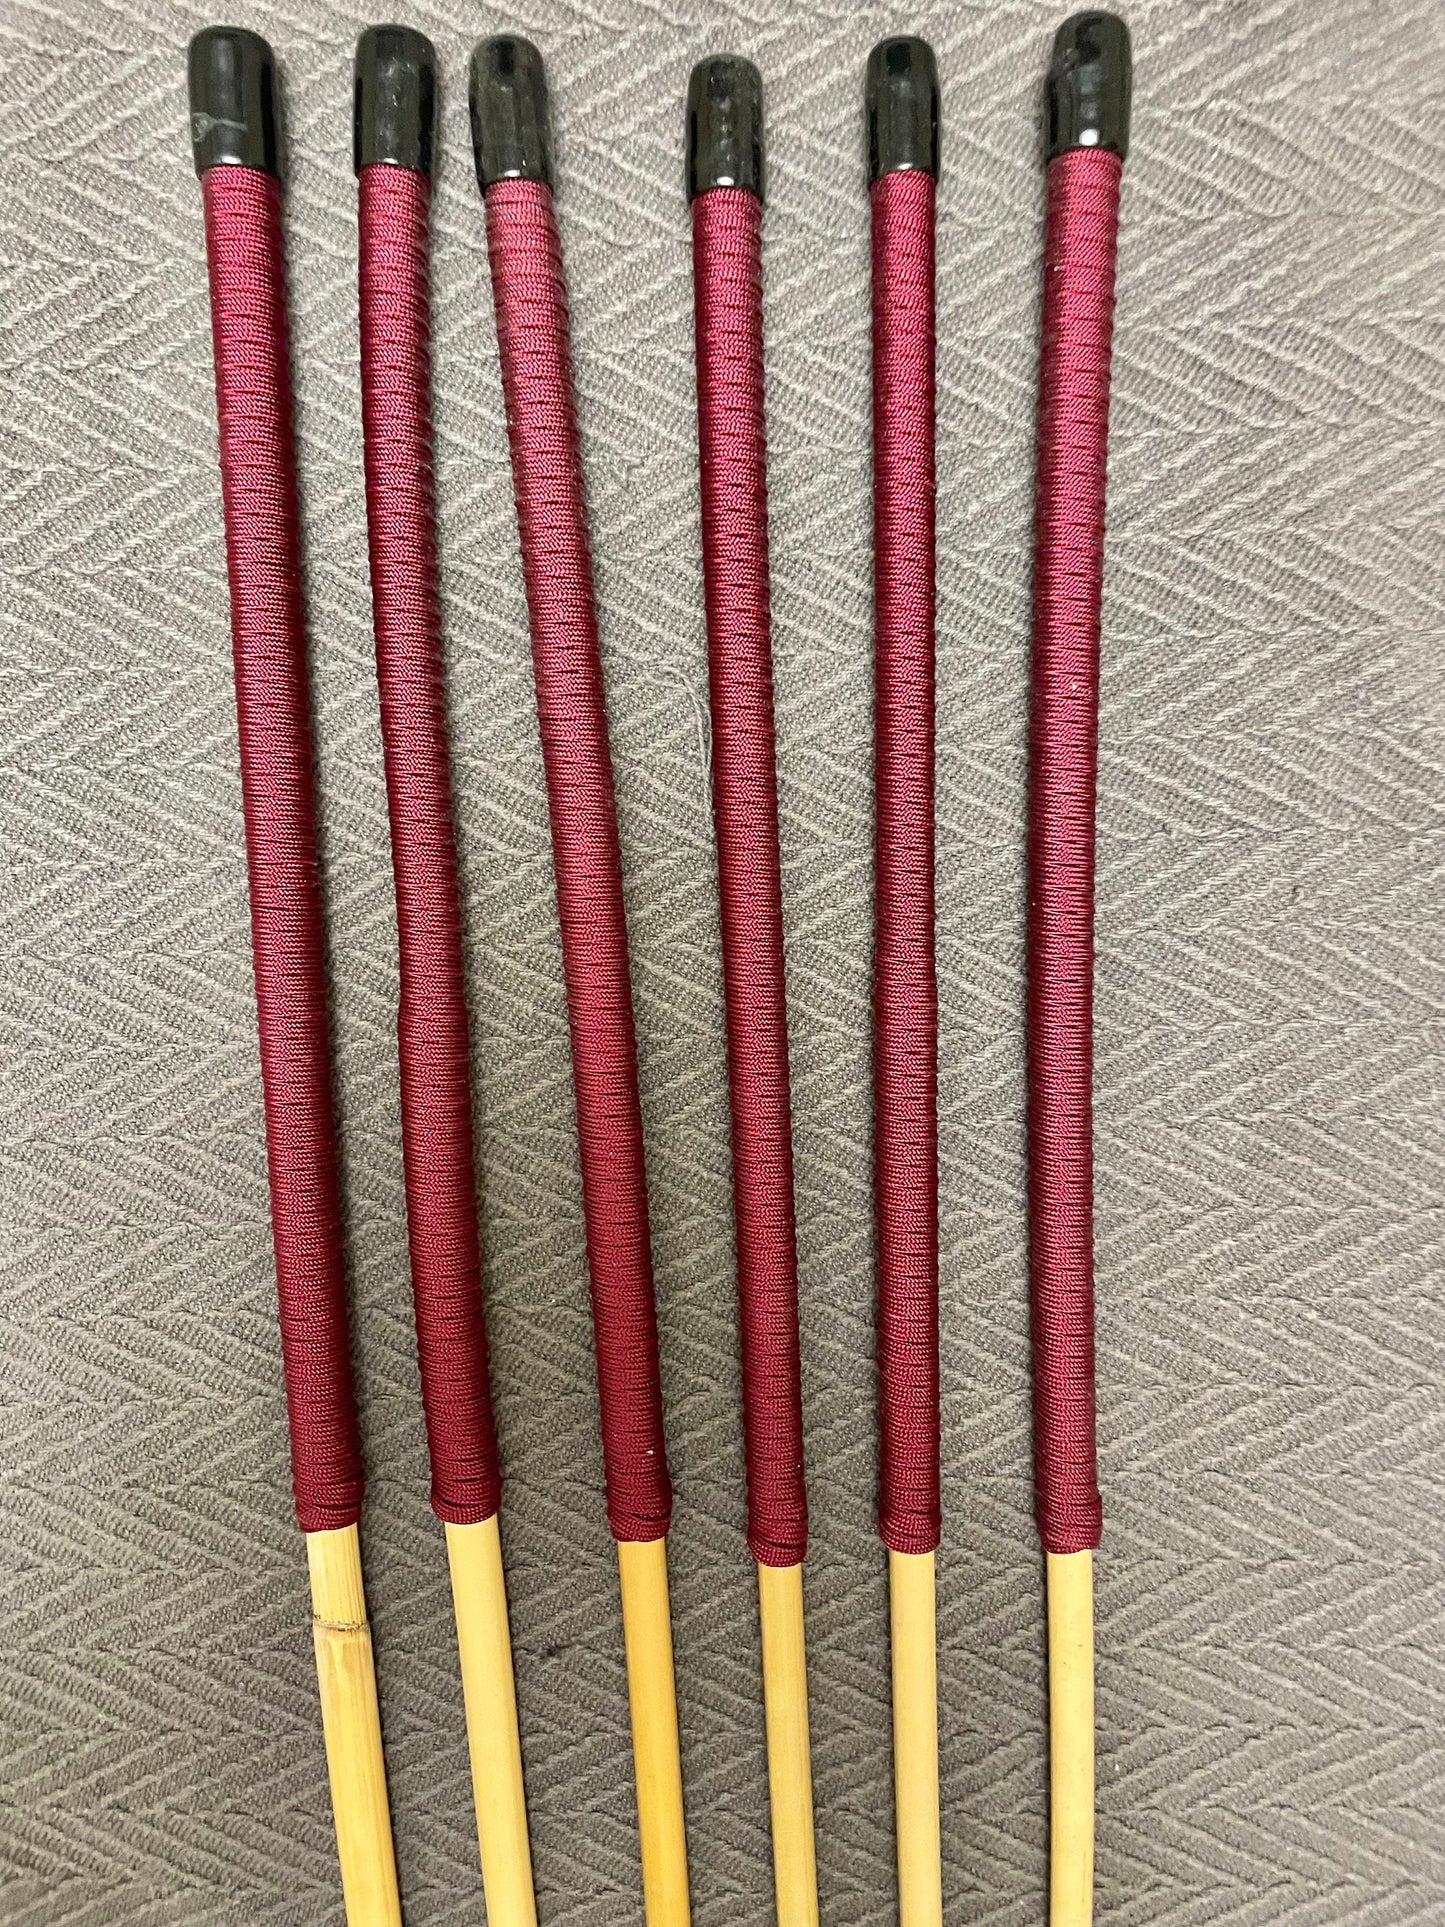 Set of 6 Classic Dragon Rattan Punishment Canes / School Canes  with Burgundy  Paracord Handles